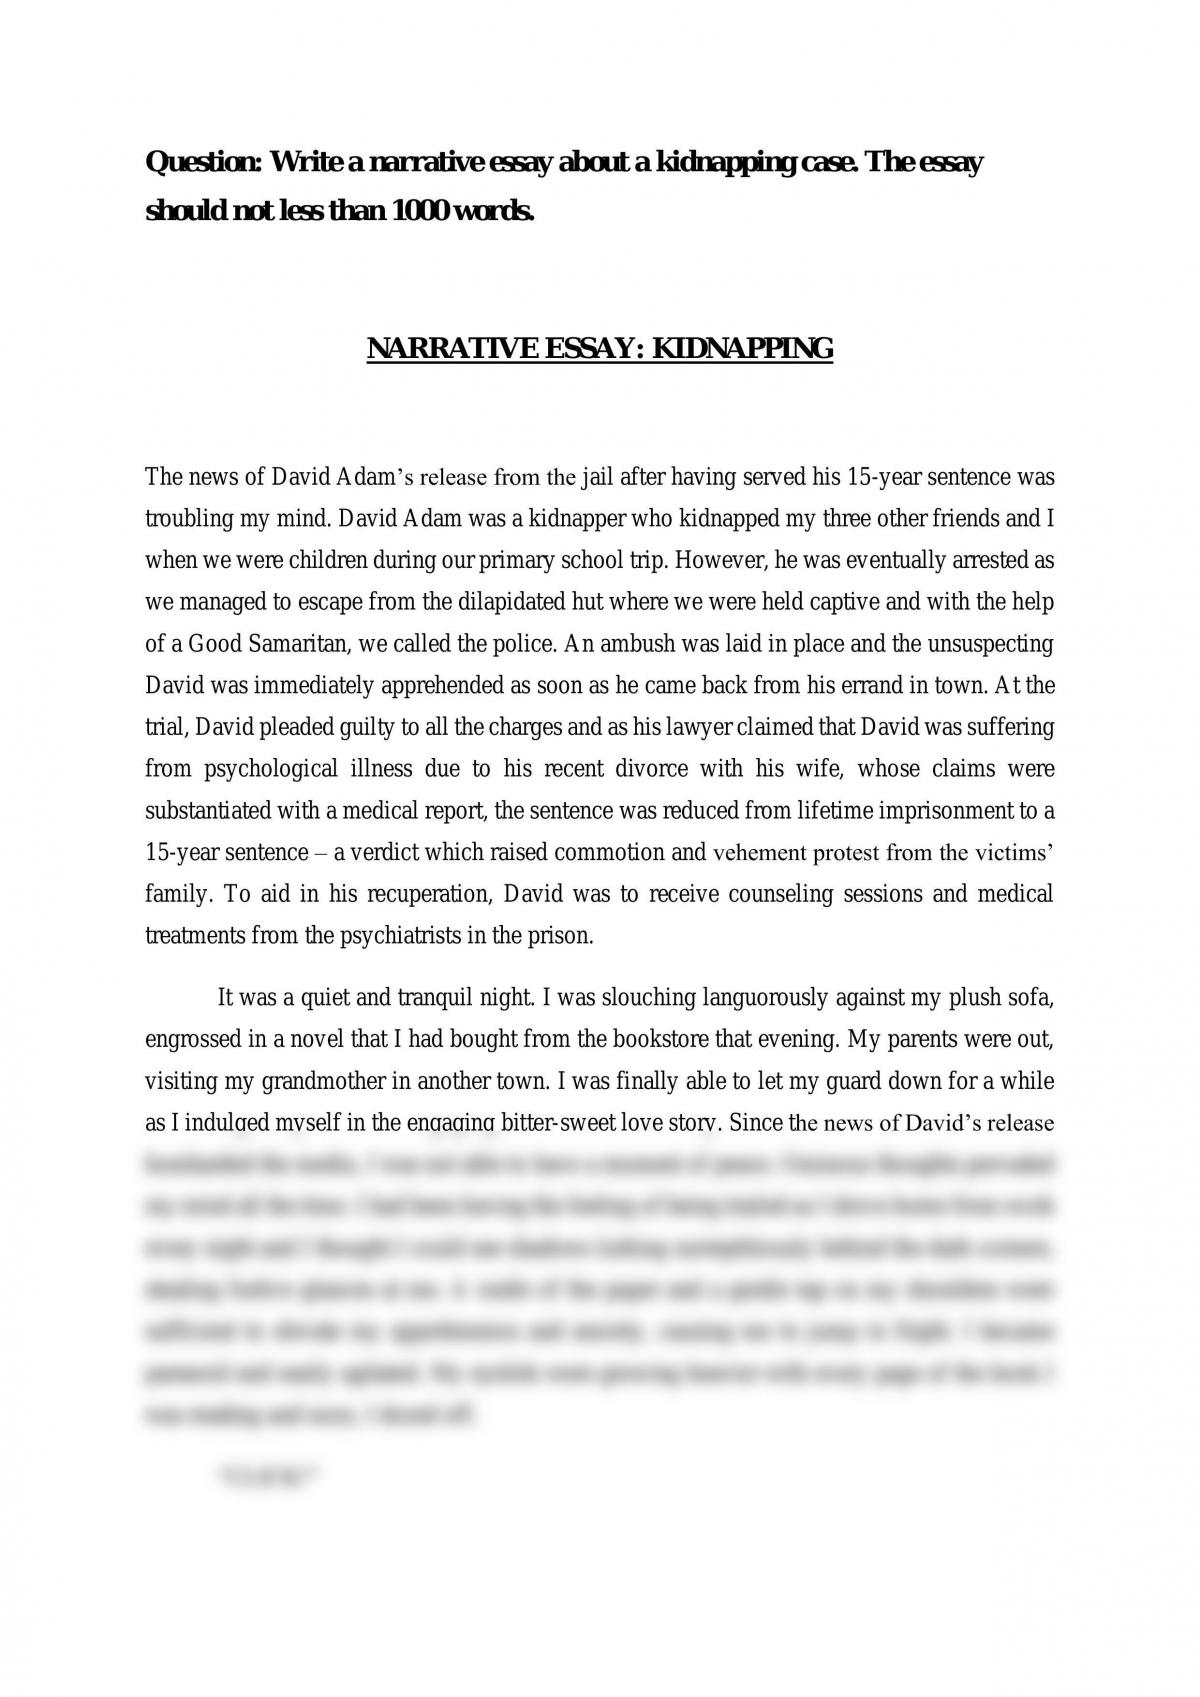 persuasive essay about kidnapping